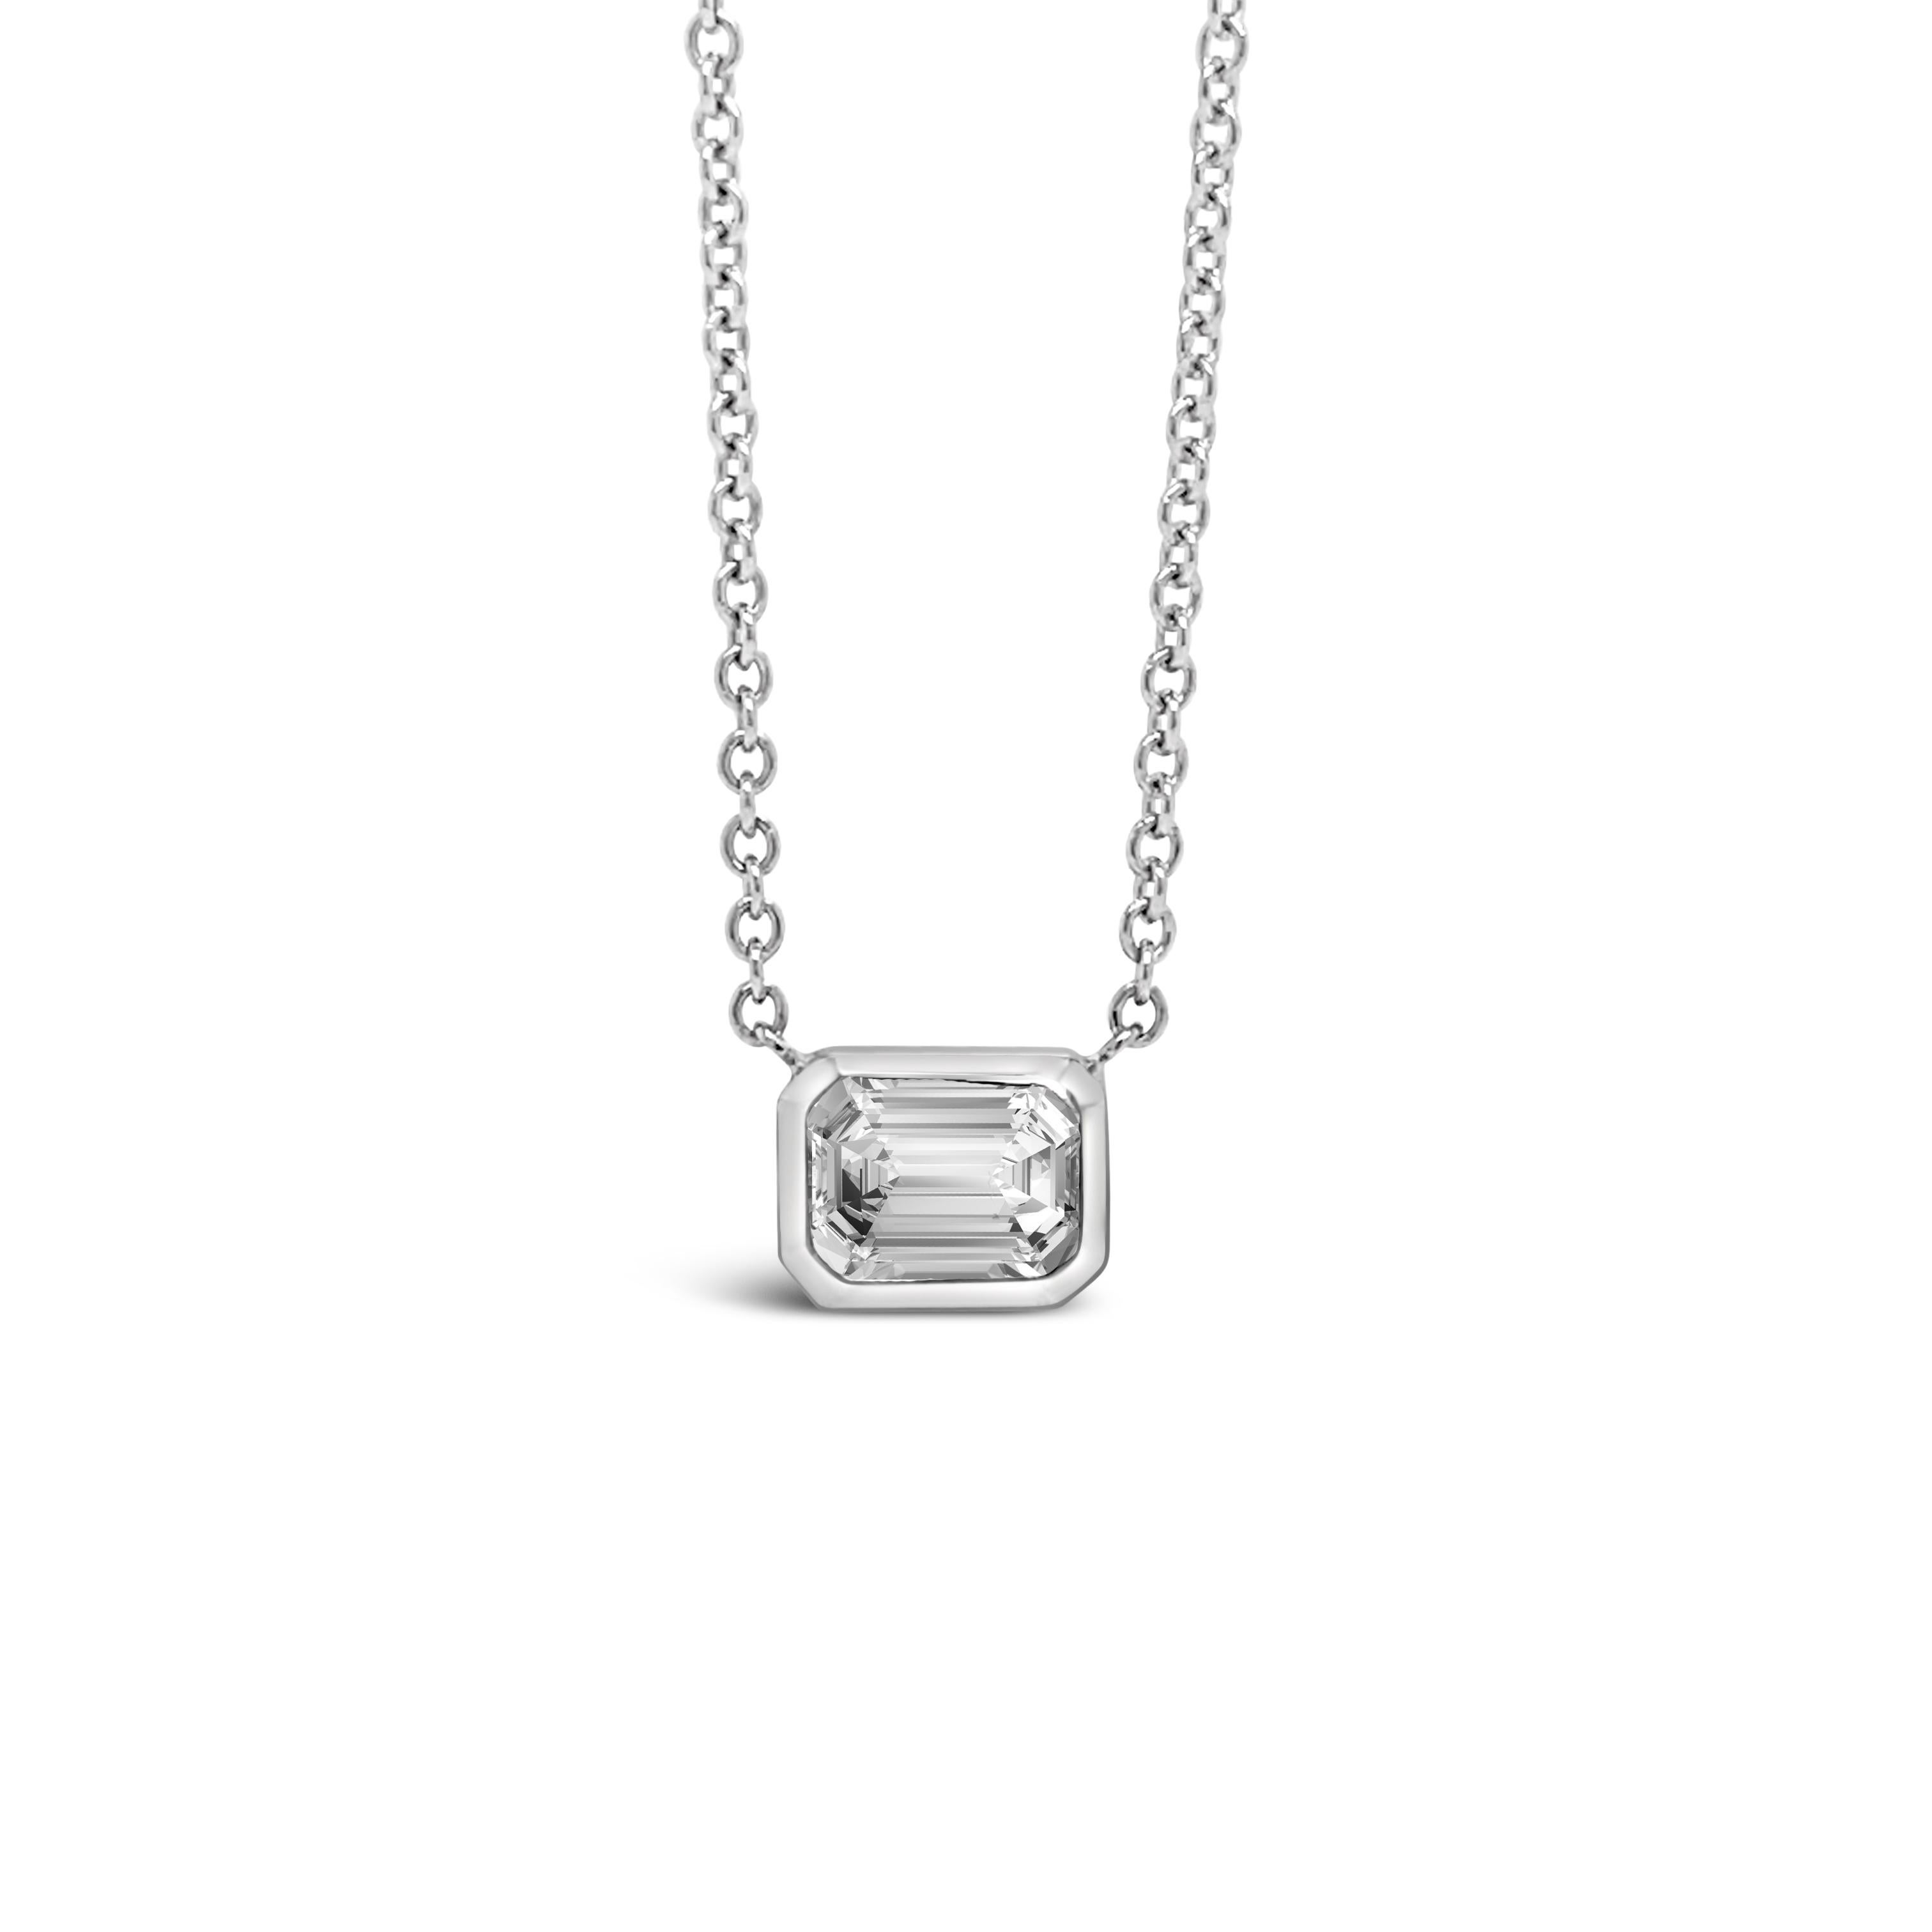 This pendant features and .59 Pointer Oval Diamond, set horizontally.
The diamond is F Color, VVS2 Clarity. The Pendant is set in 18K White Gold.
GIA certified